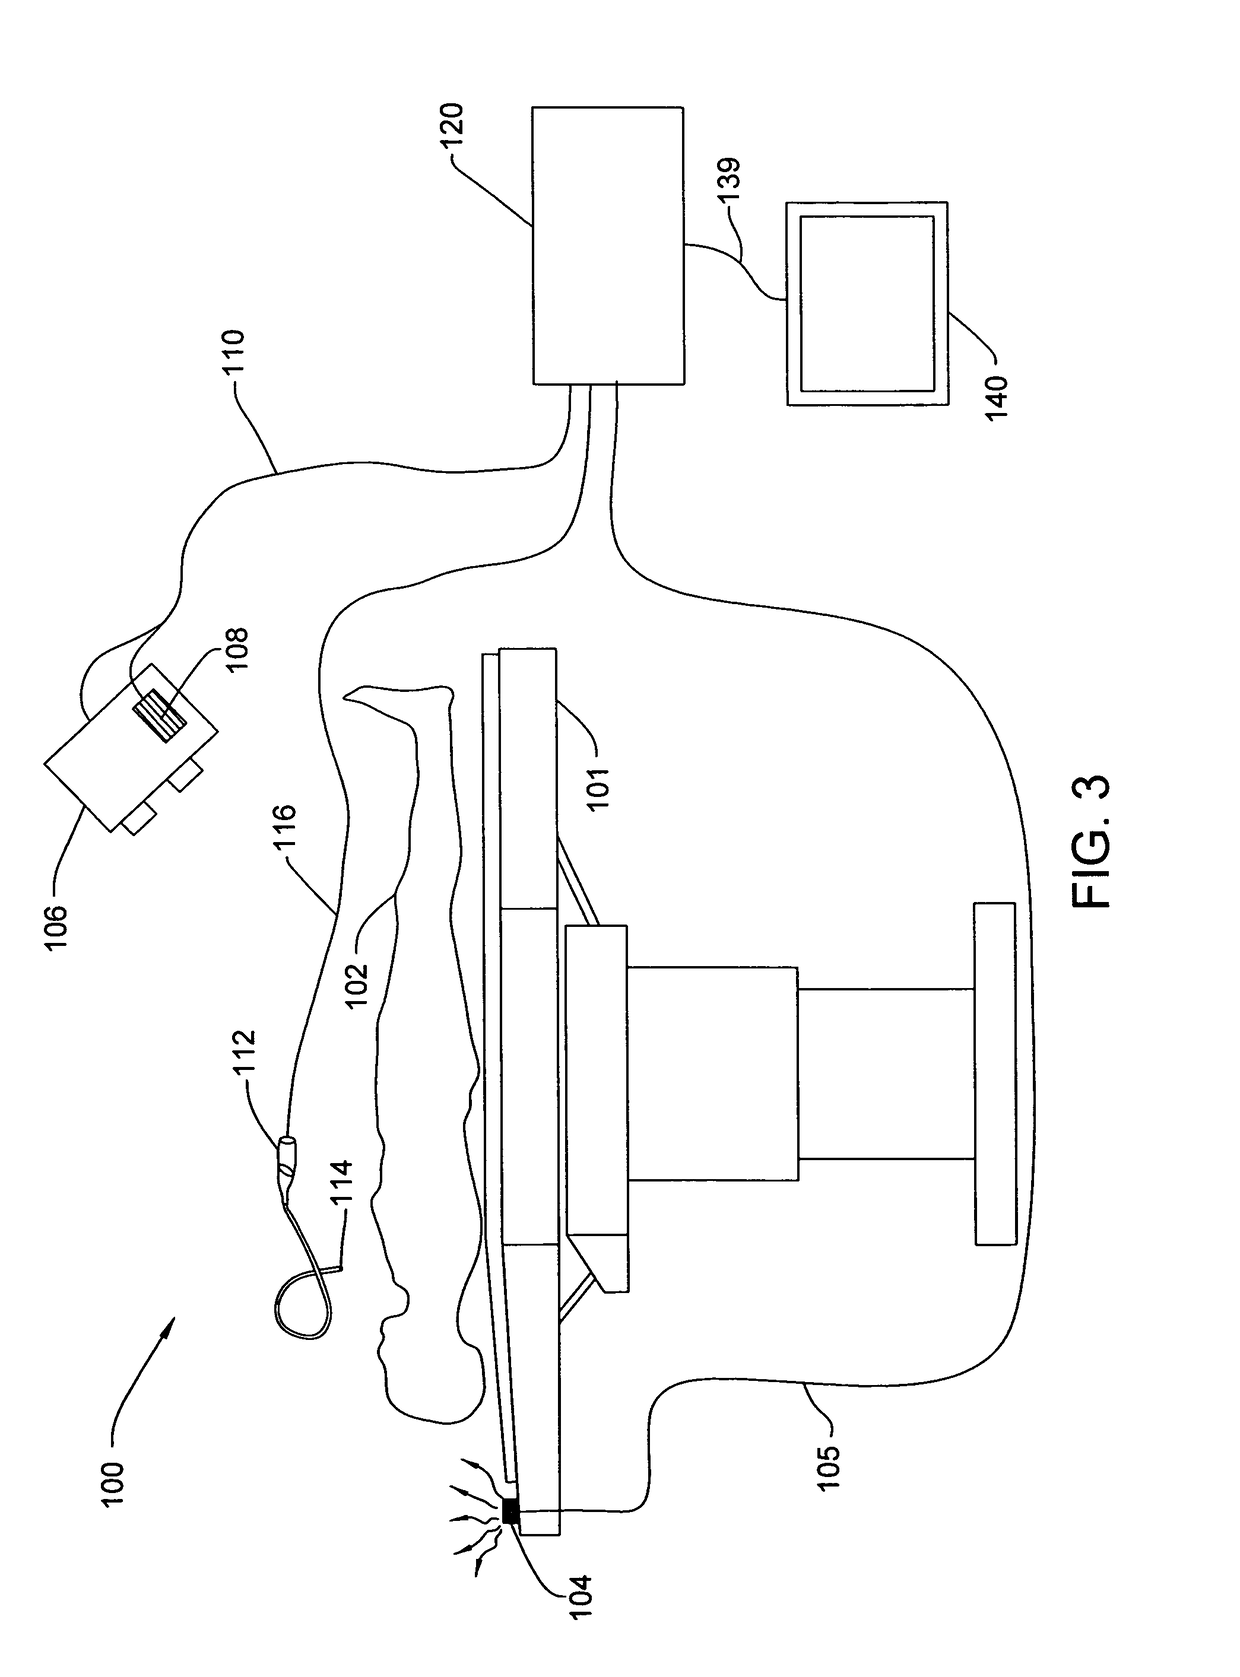 System and method for 3-D tracking of surgical instrument in relation to patient body